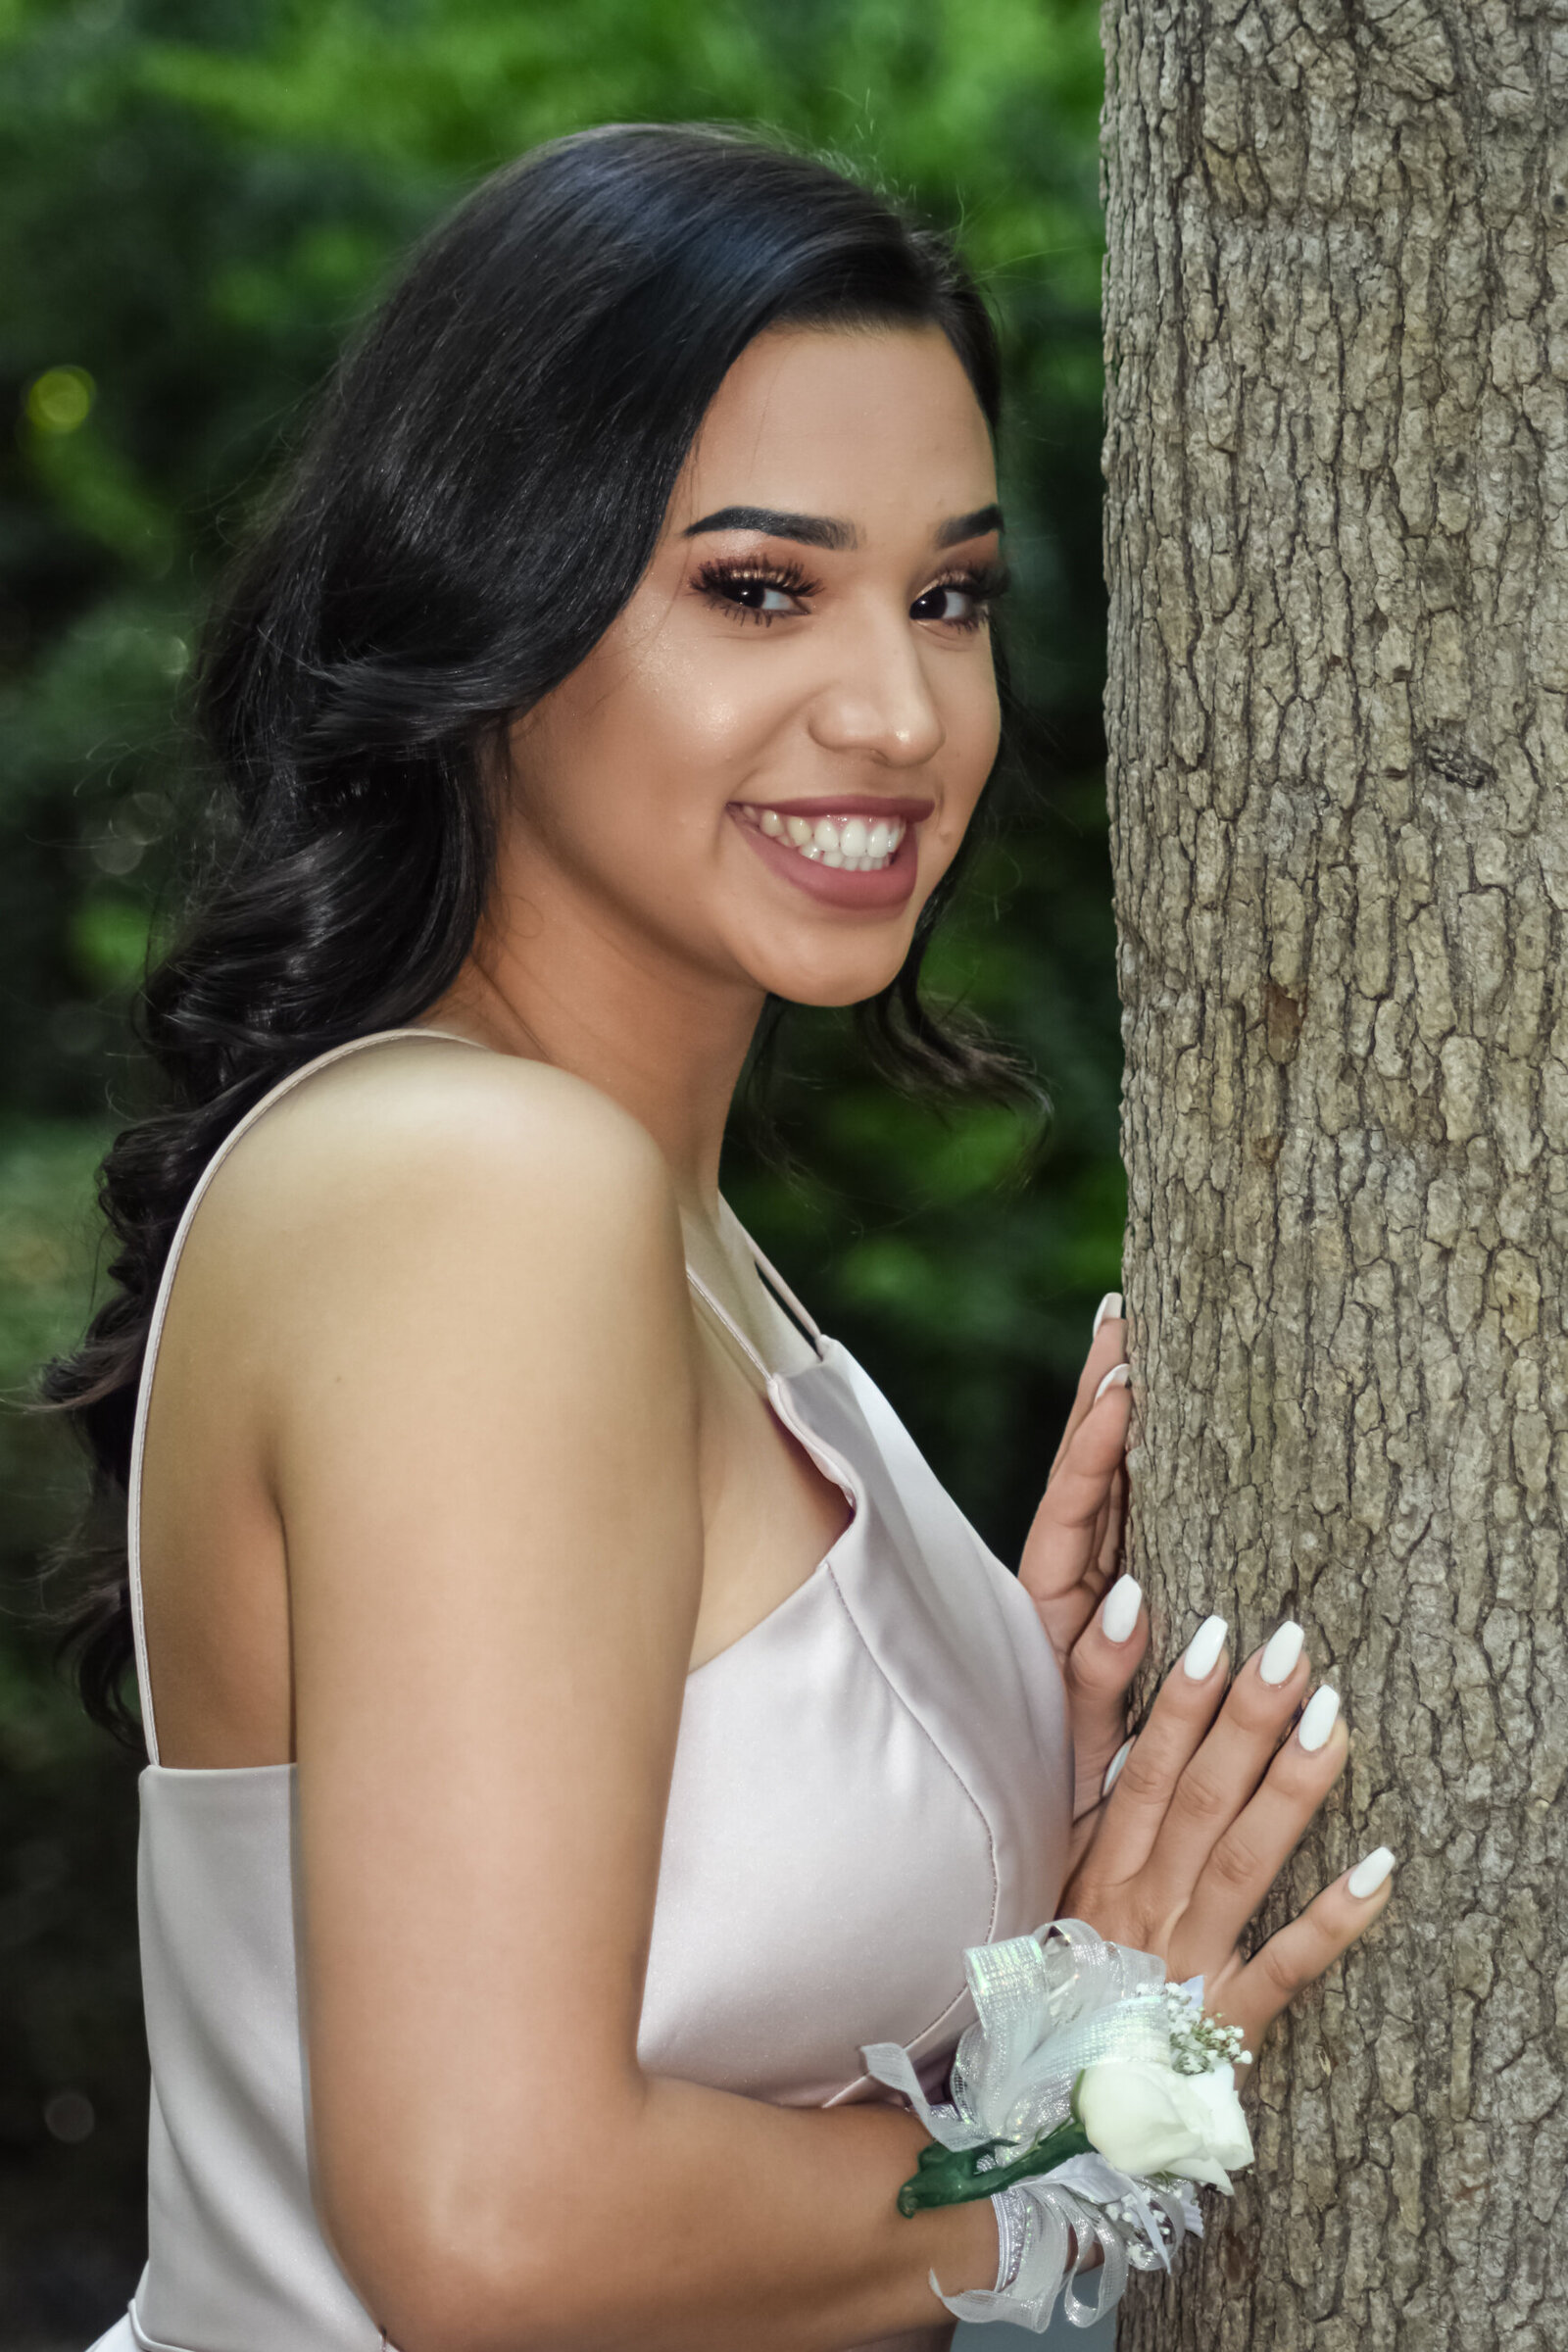 a young woman in her prom dress wearing a white corsage posing against a tree. photographed by Millz Photography in Greenville, SC